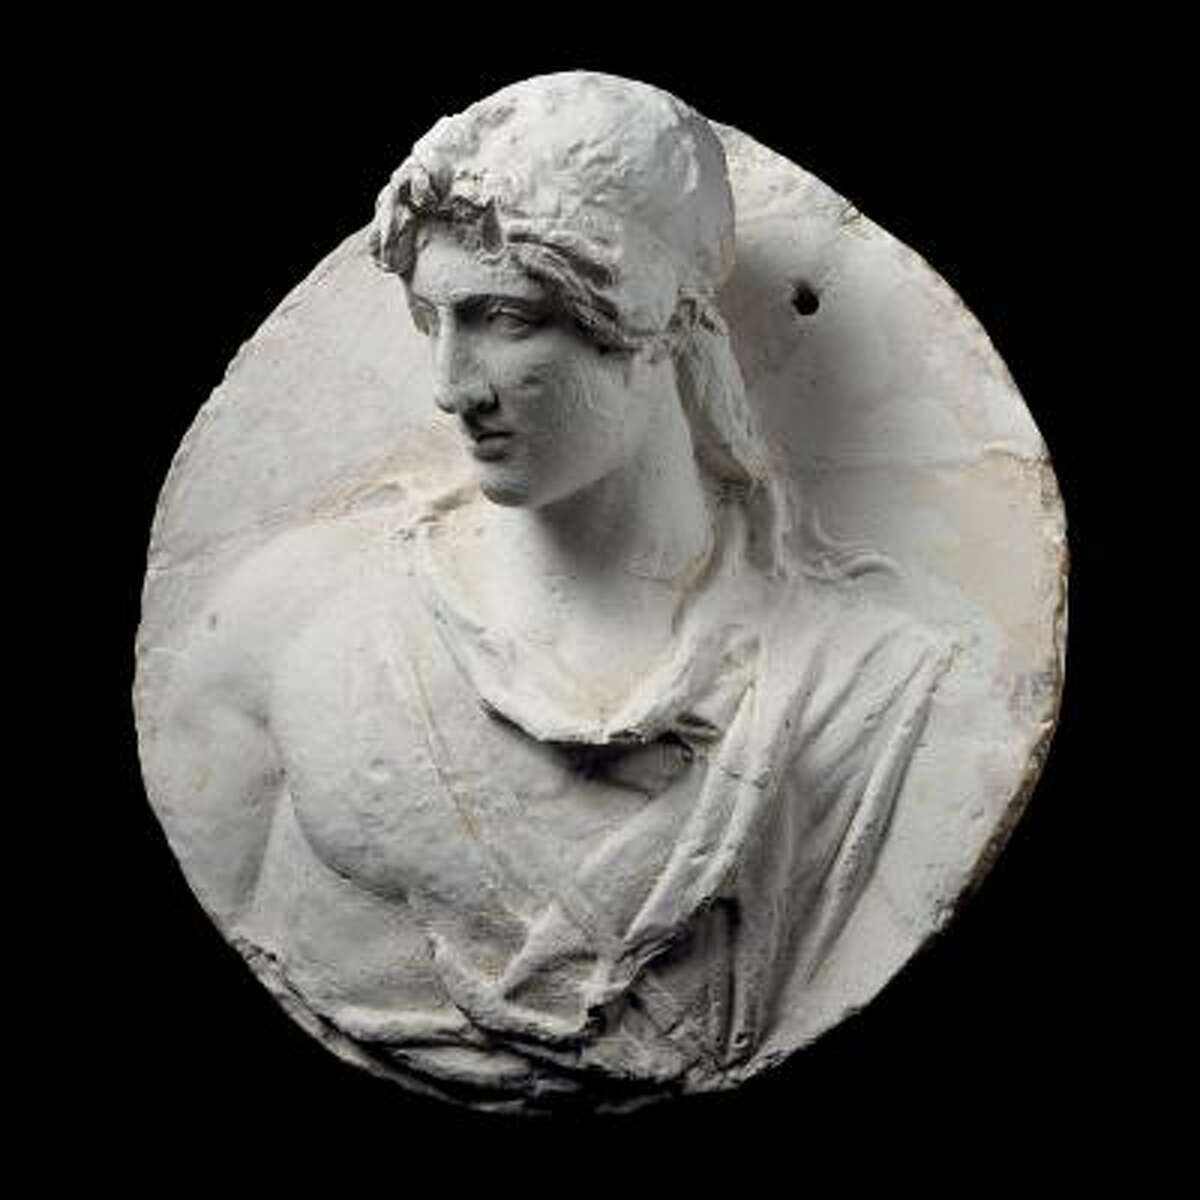 Circular plaster medallion for use as a model with a young man in Classical Greek style, found in a merchant's store room. 1st century A.D. Plaster.